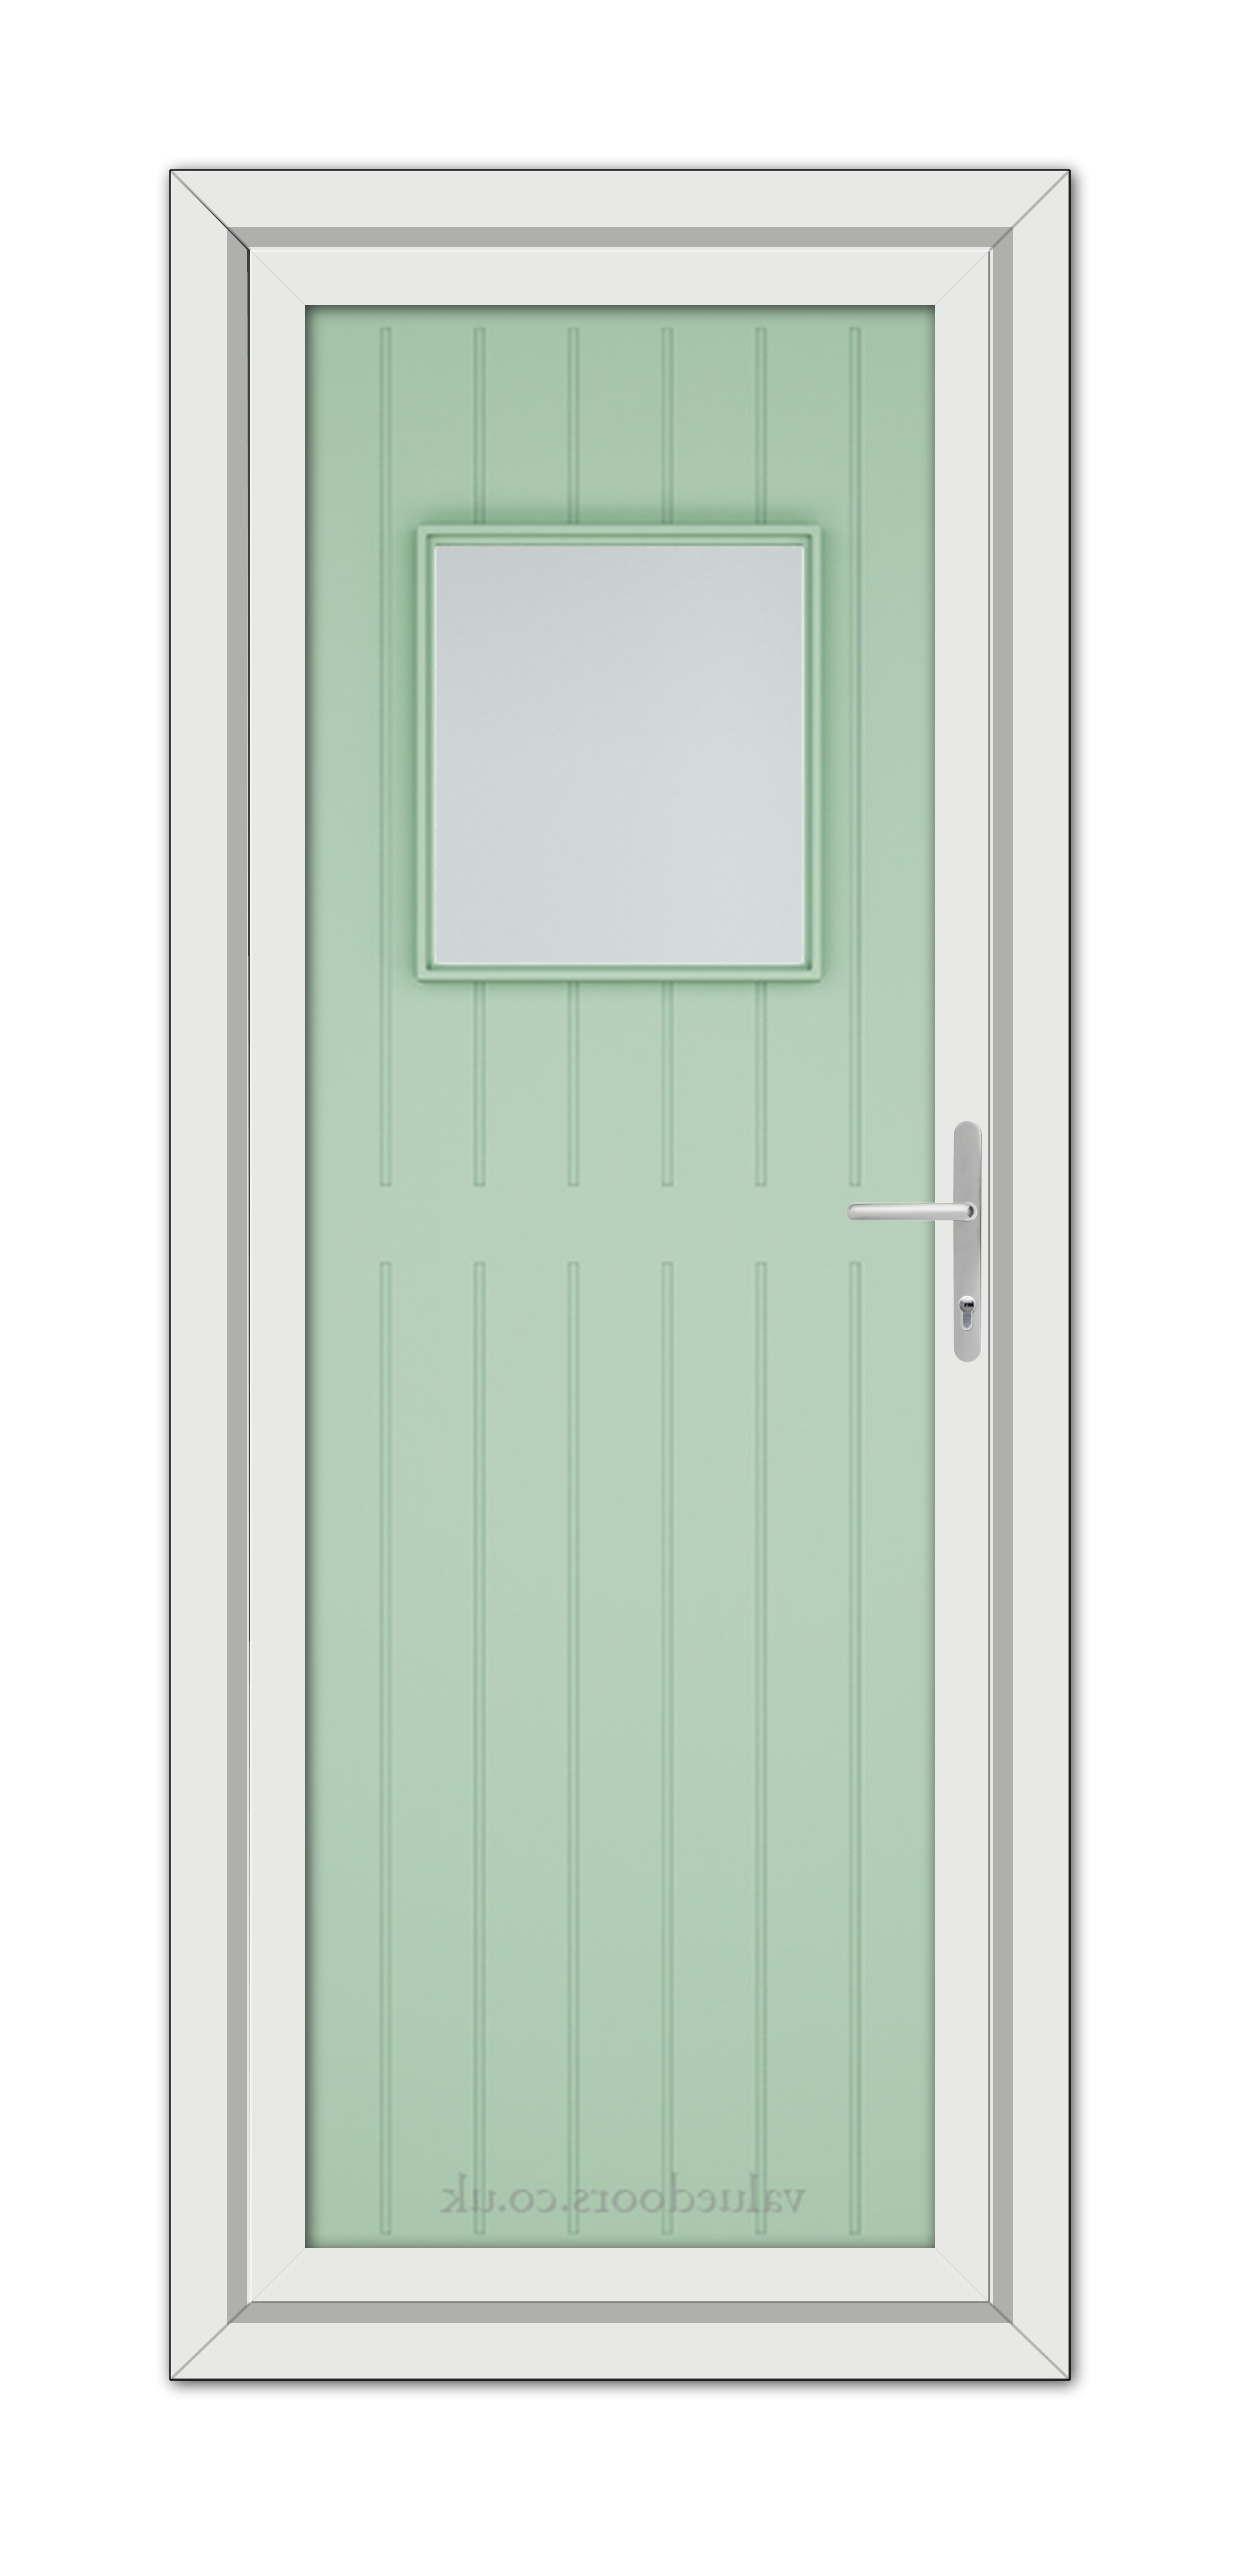 A Chartwell Green Chatsworth uPVC door with a square sign.